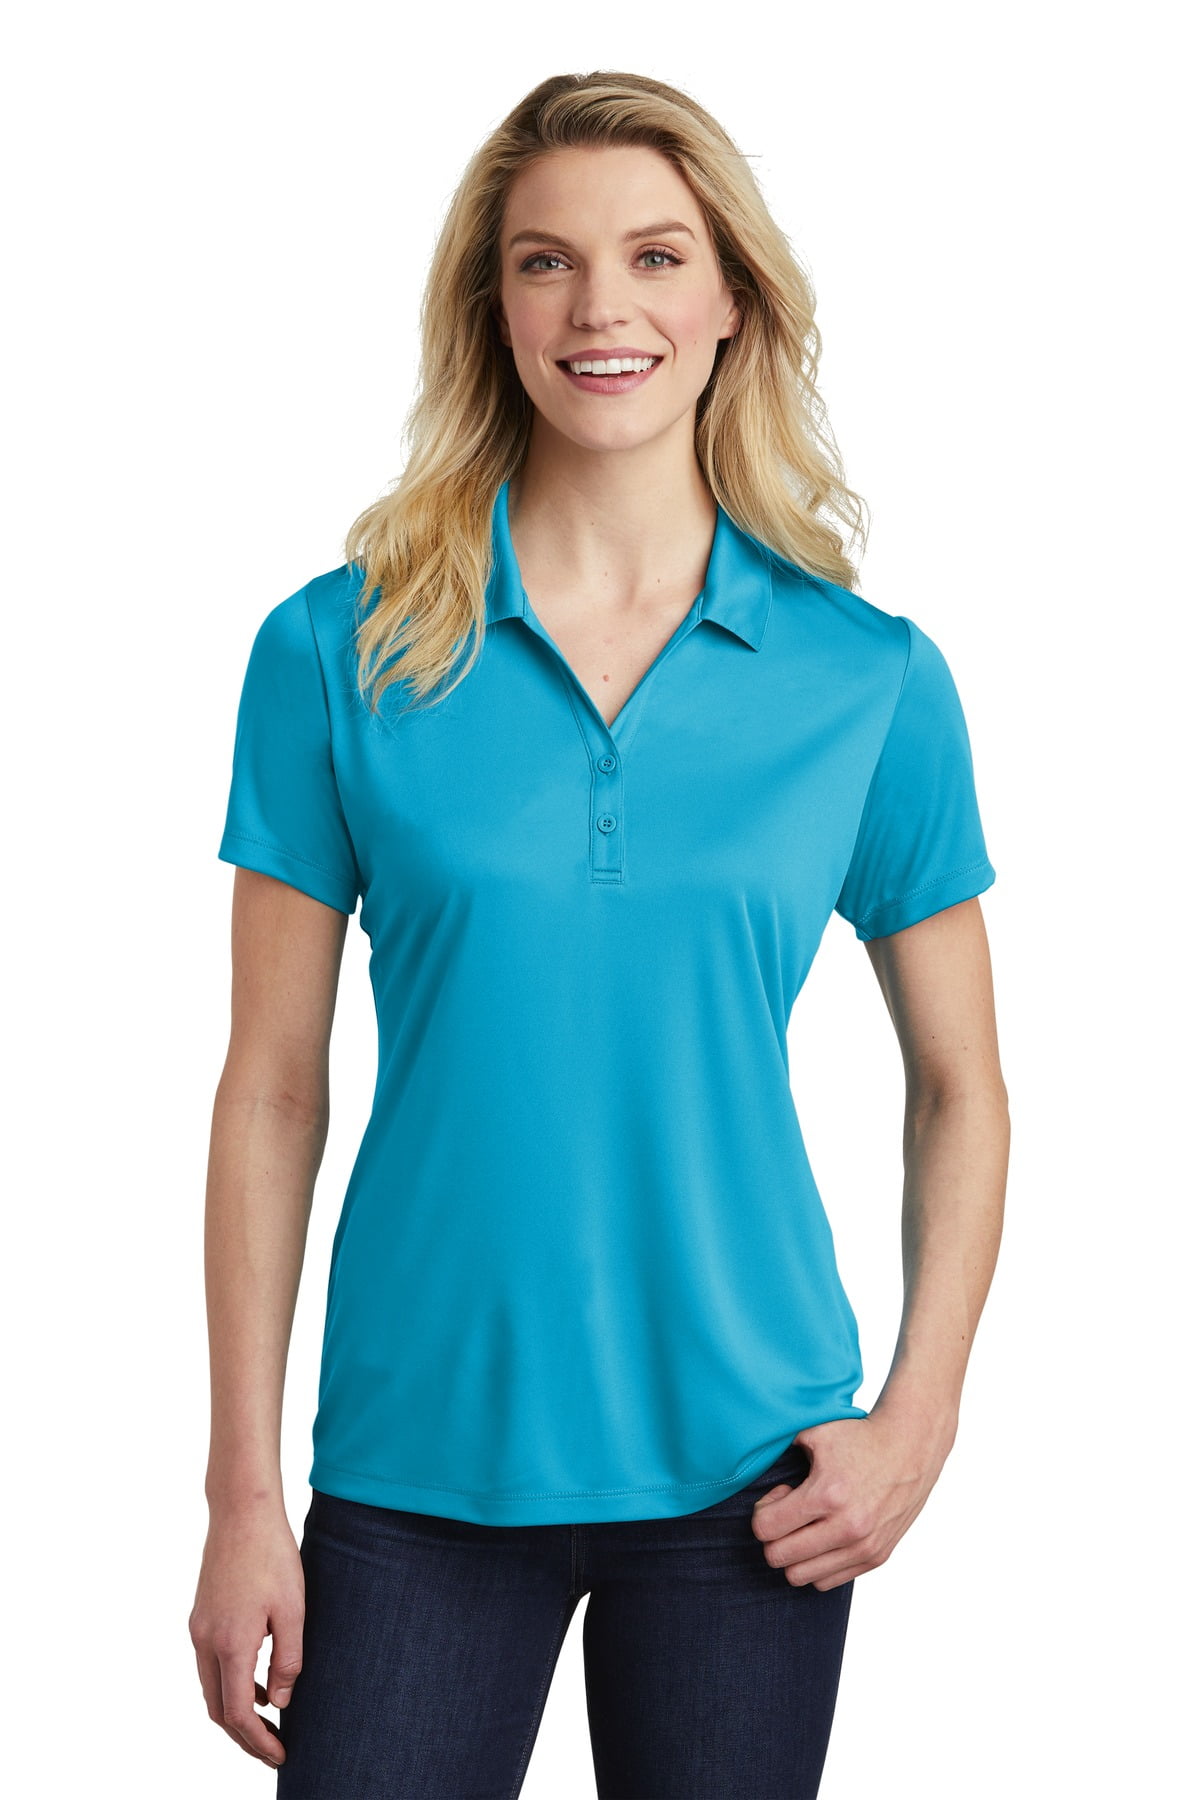 A4 Women's Moisture Wicking Two Button Placket Short Sleeve Polo Shirt NW3261 